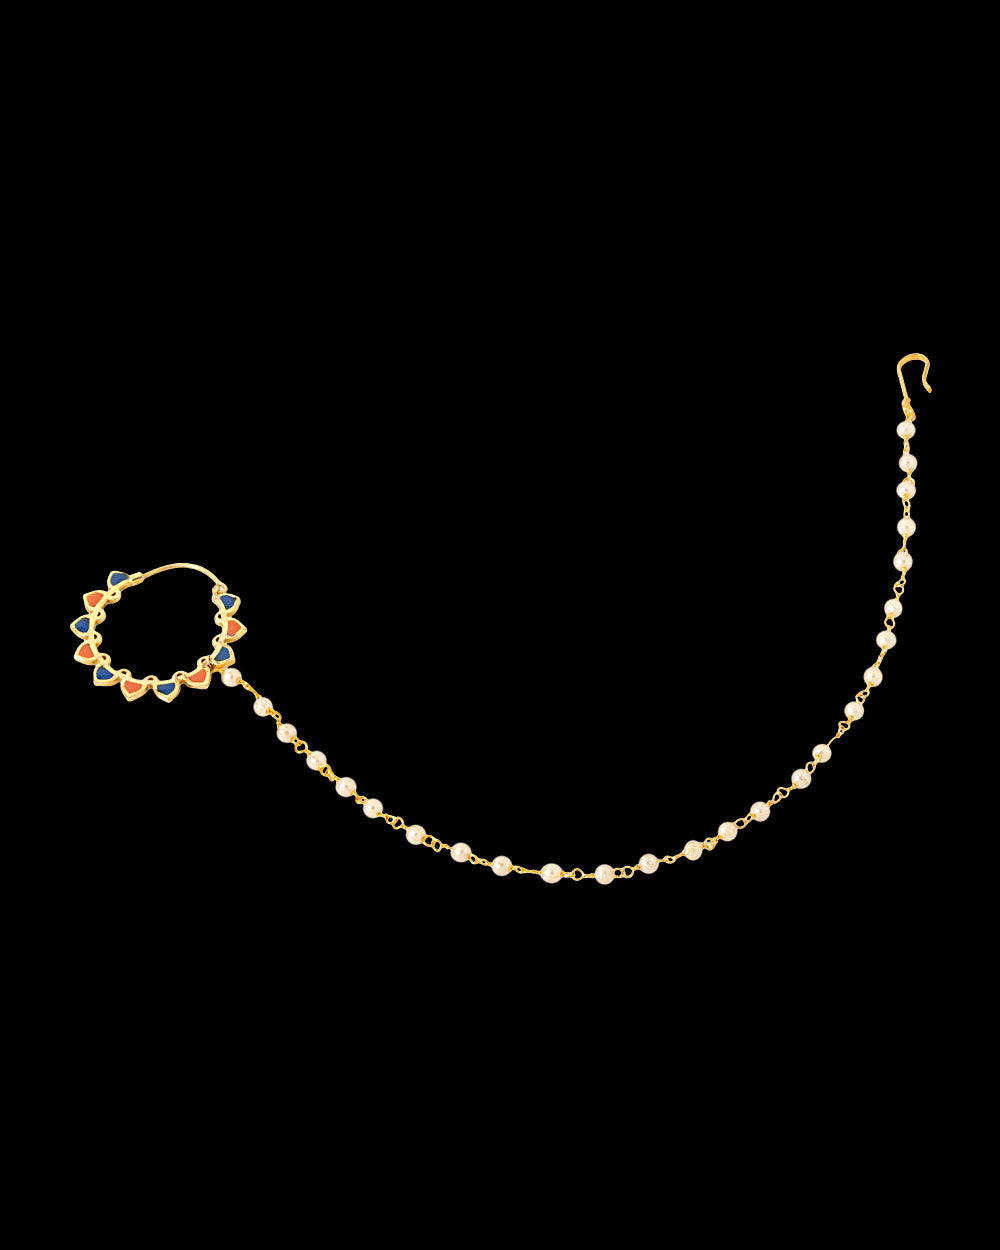 Golden Nose-Pin Rimmed With Pearl Beads